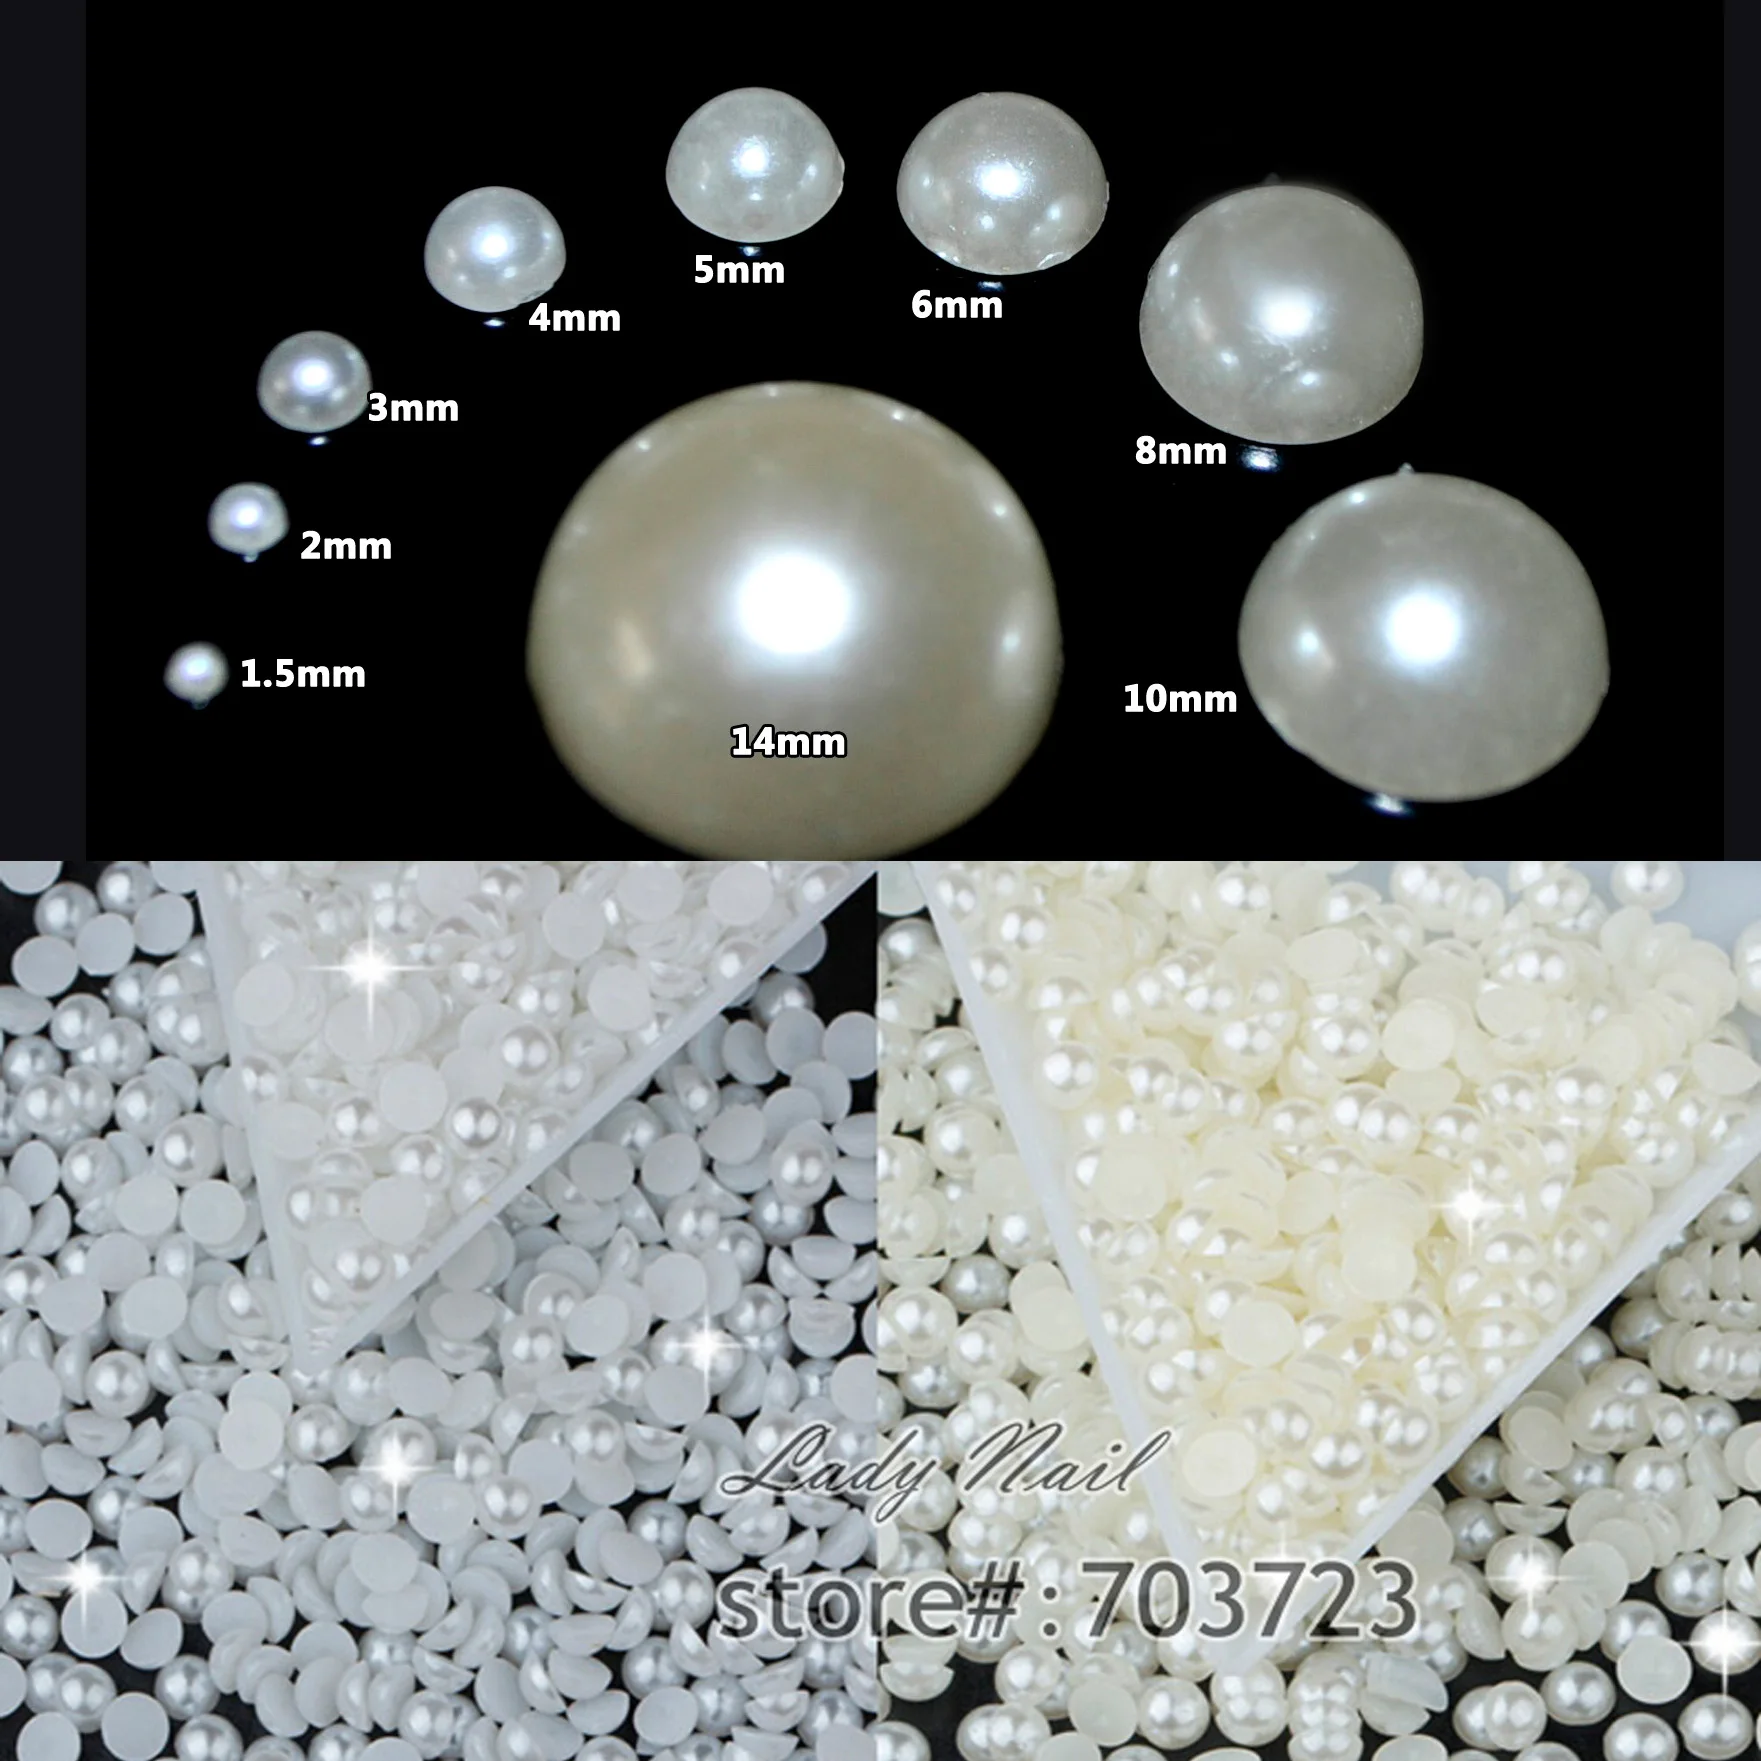 White Half Round Flatback Pearls 1.5mm 2mm 3mm 4mm 5mm 6mm 8mm 10mm 14mm  for Nail Art Phone Deco Jewelry DIY ABS Gem Beads - AliExpress